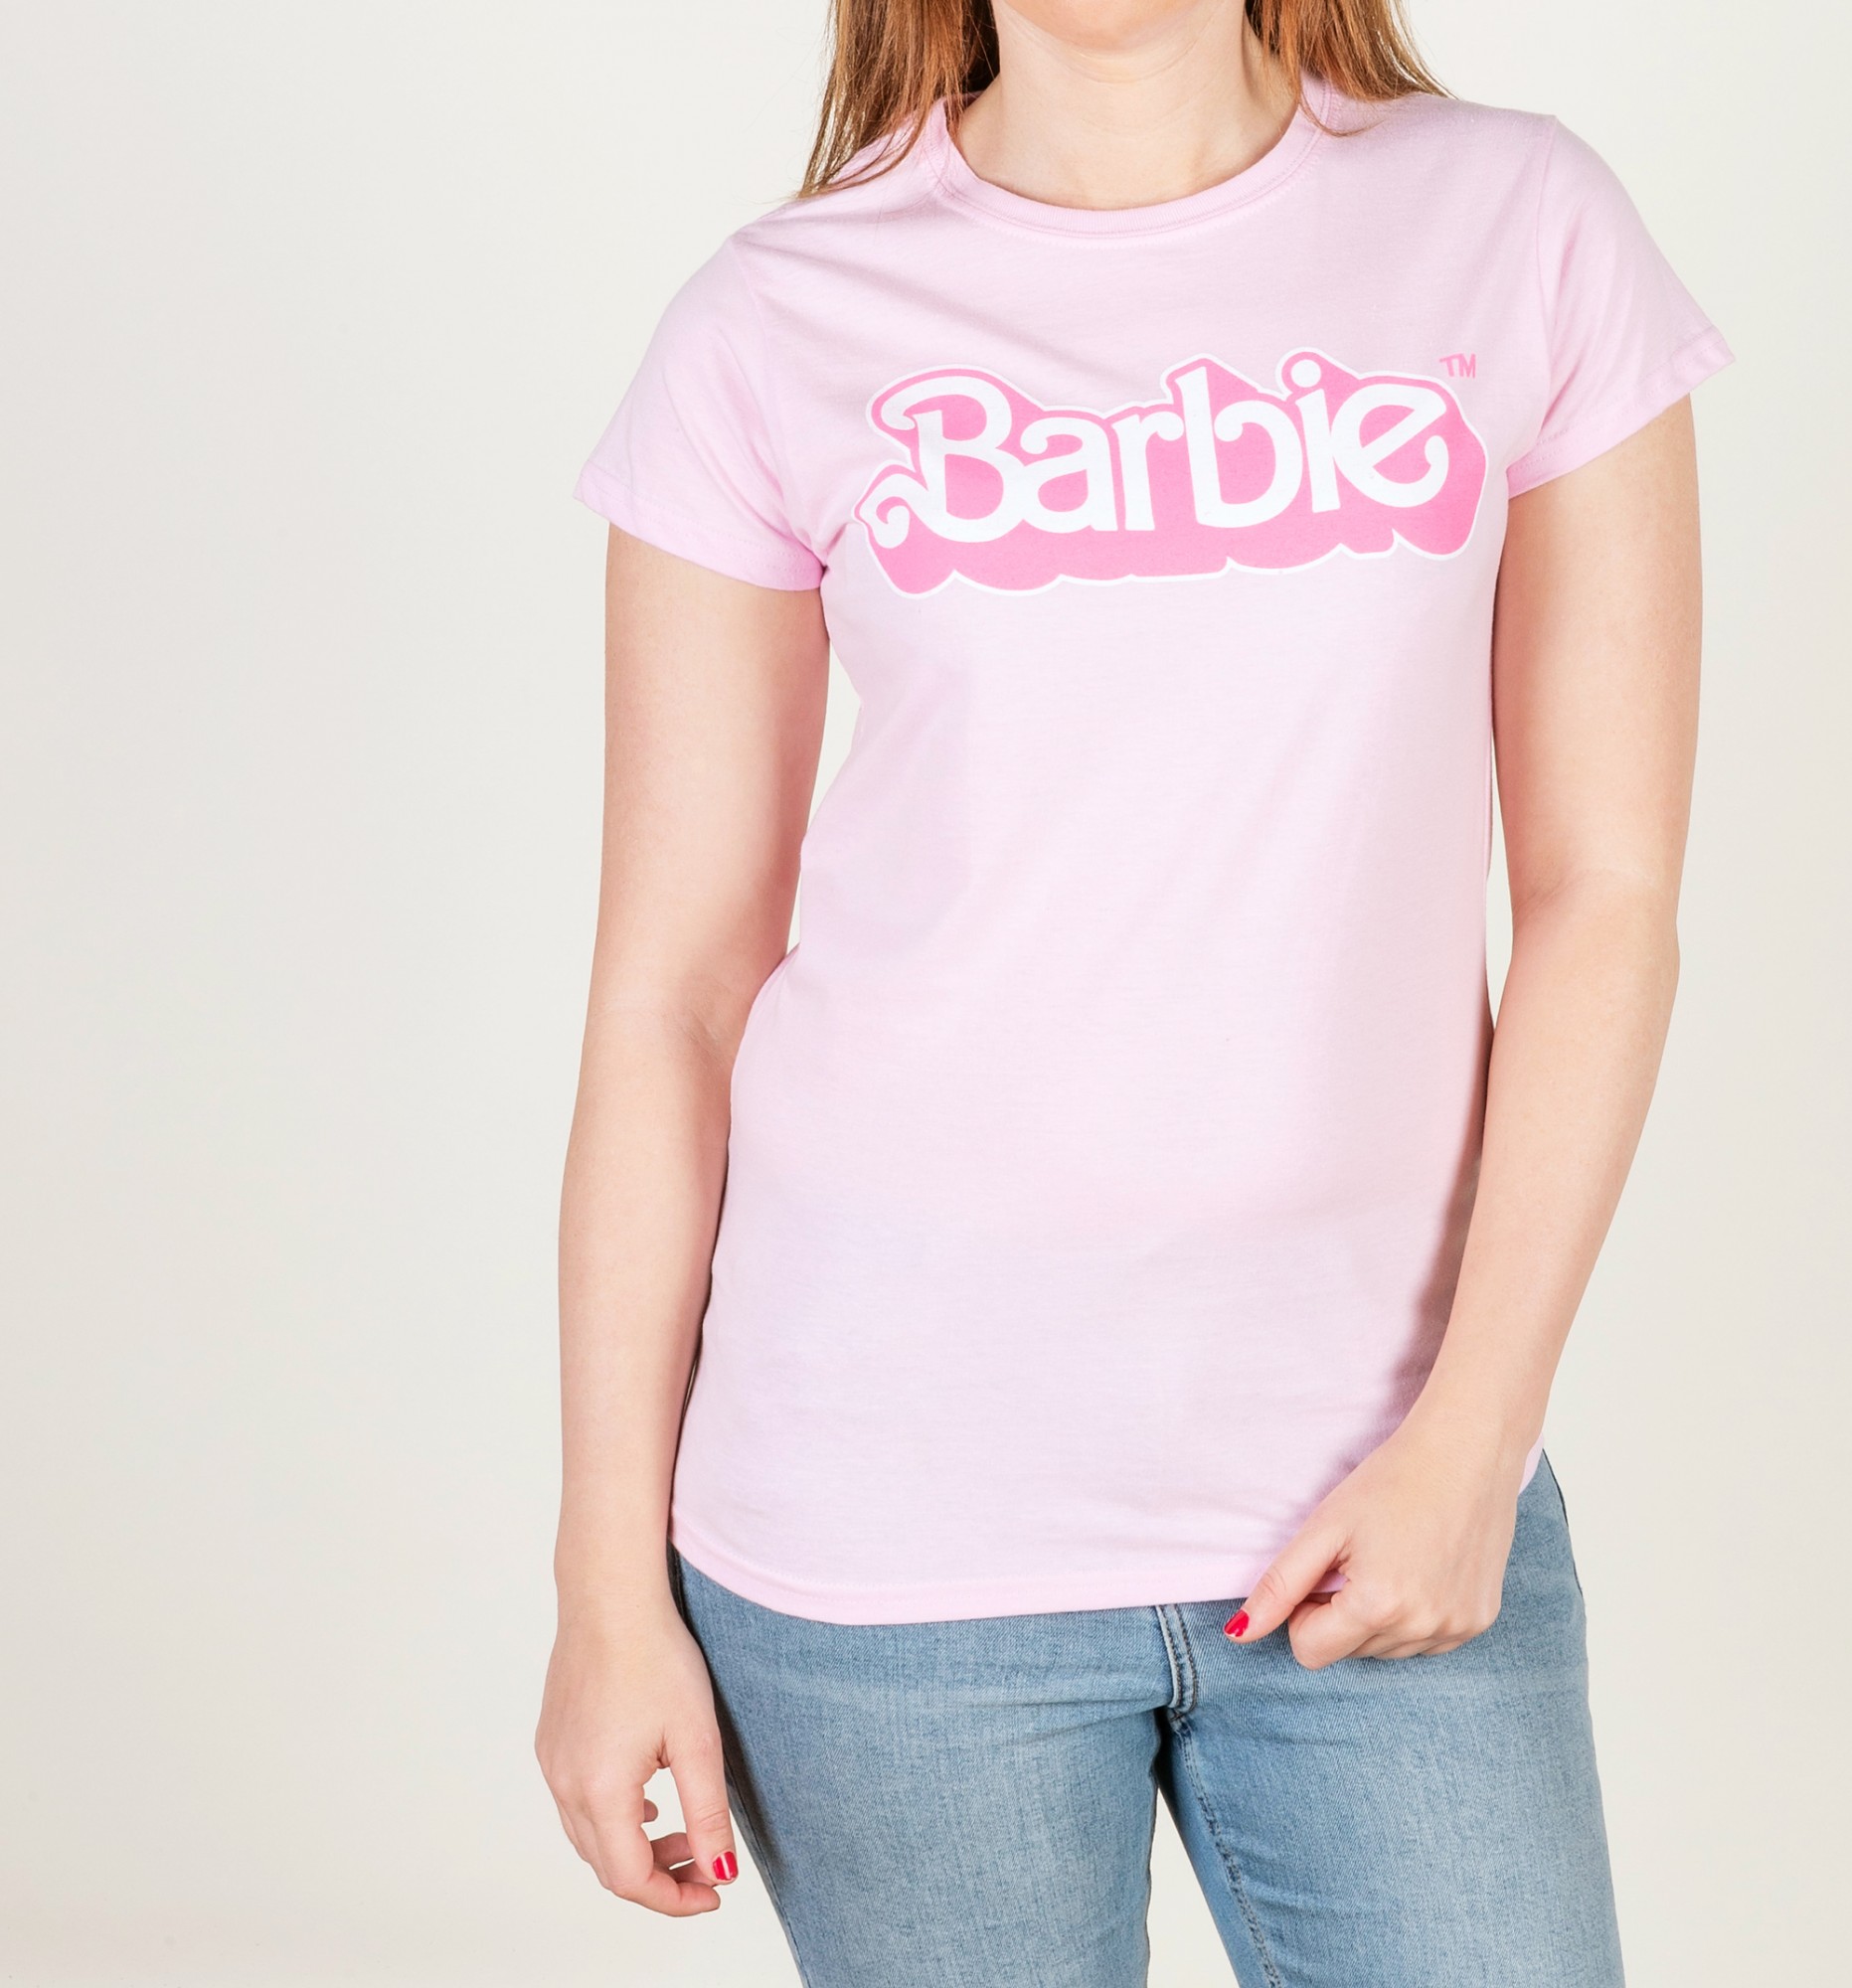 barbie shirts for adults